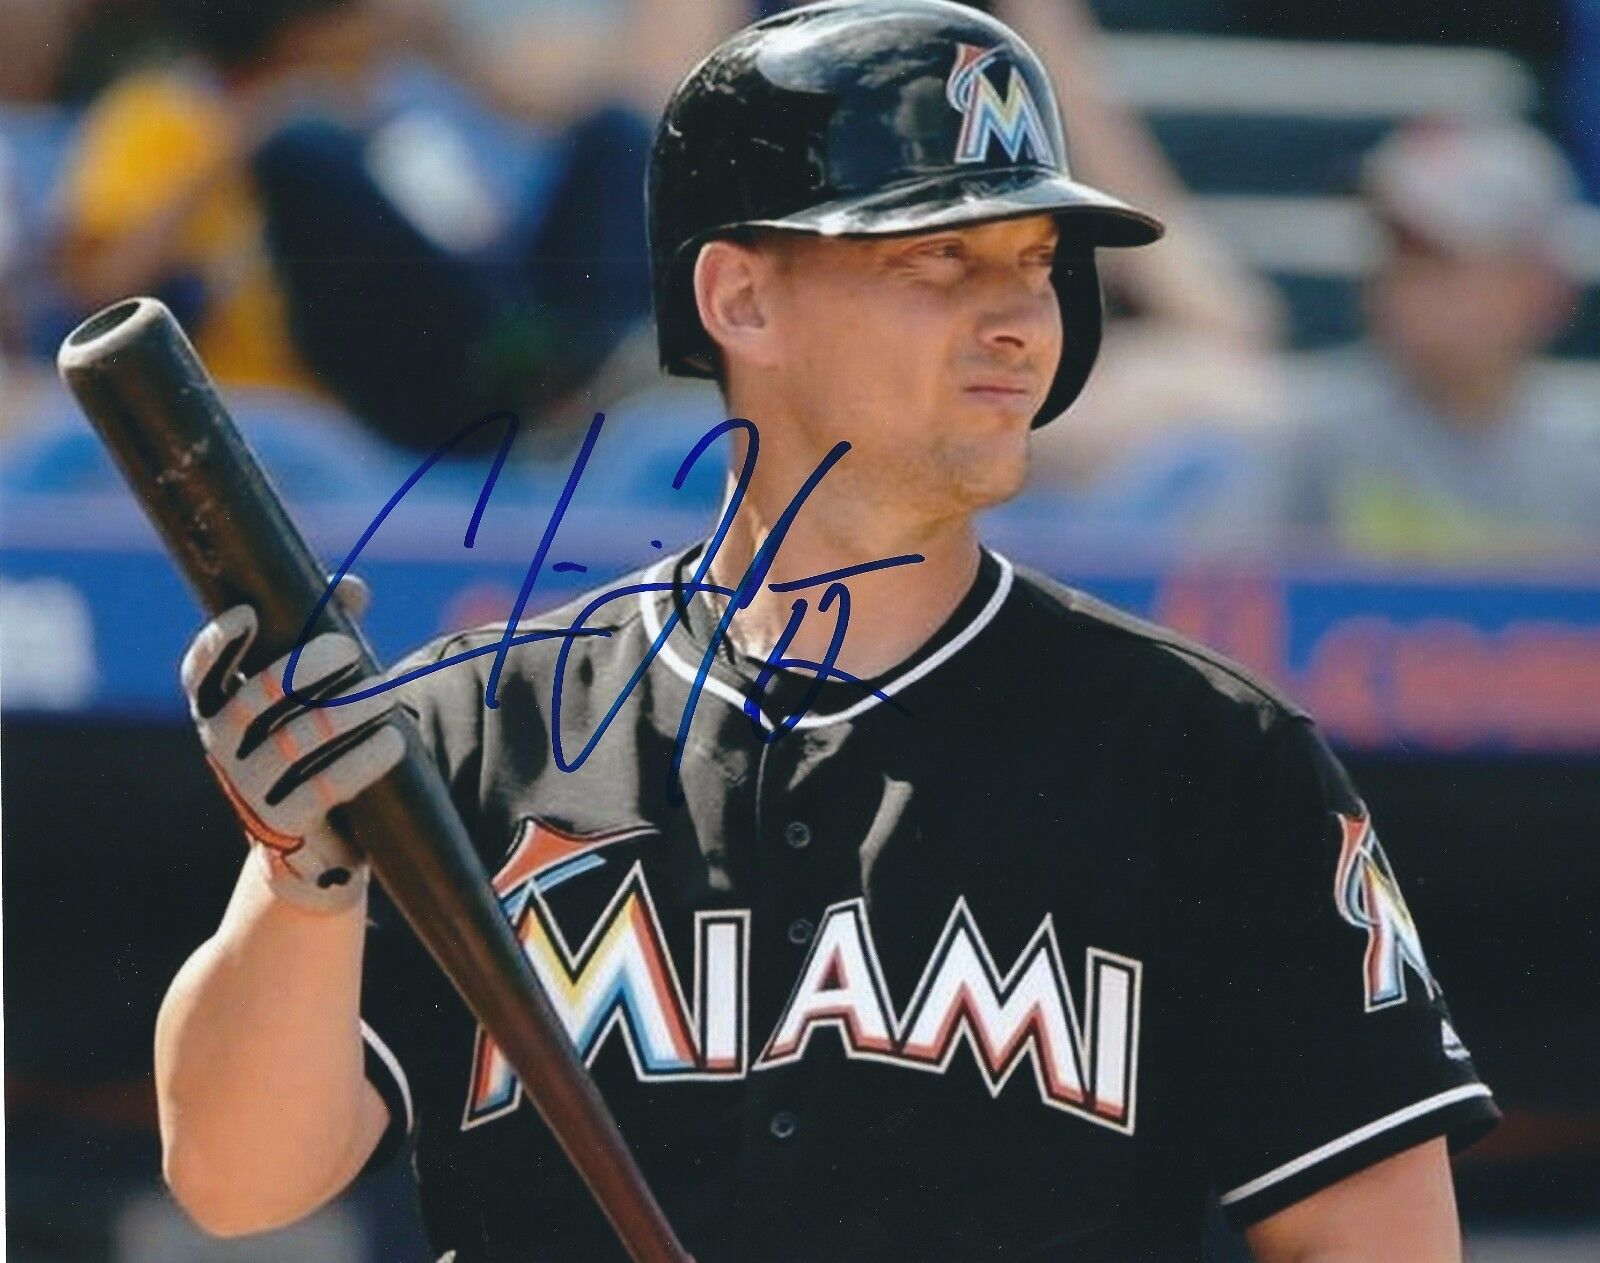 Autographed 8x10 CHRIS JOHNSON Miami Marlins Photo Poster painting - COA